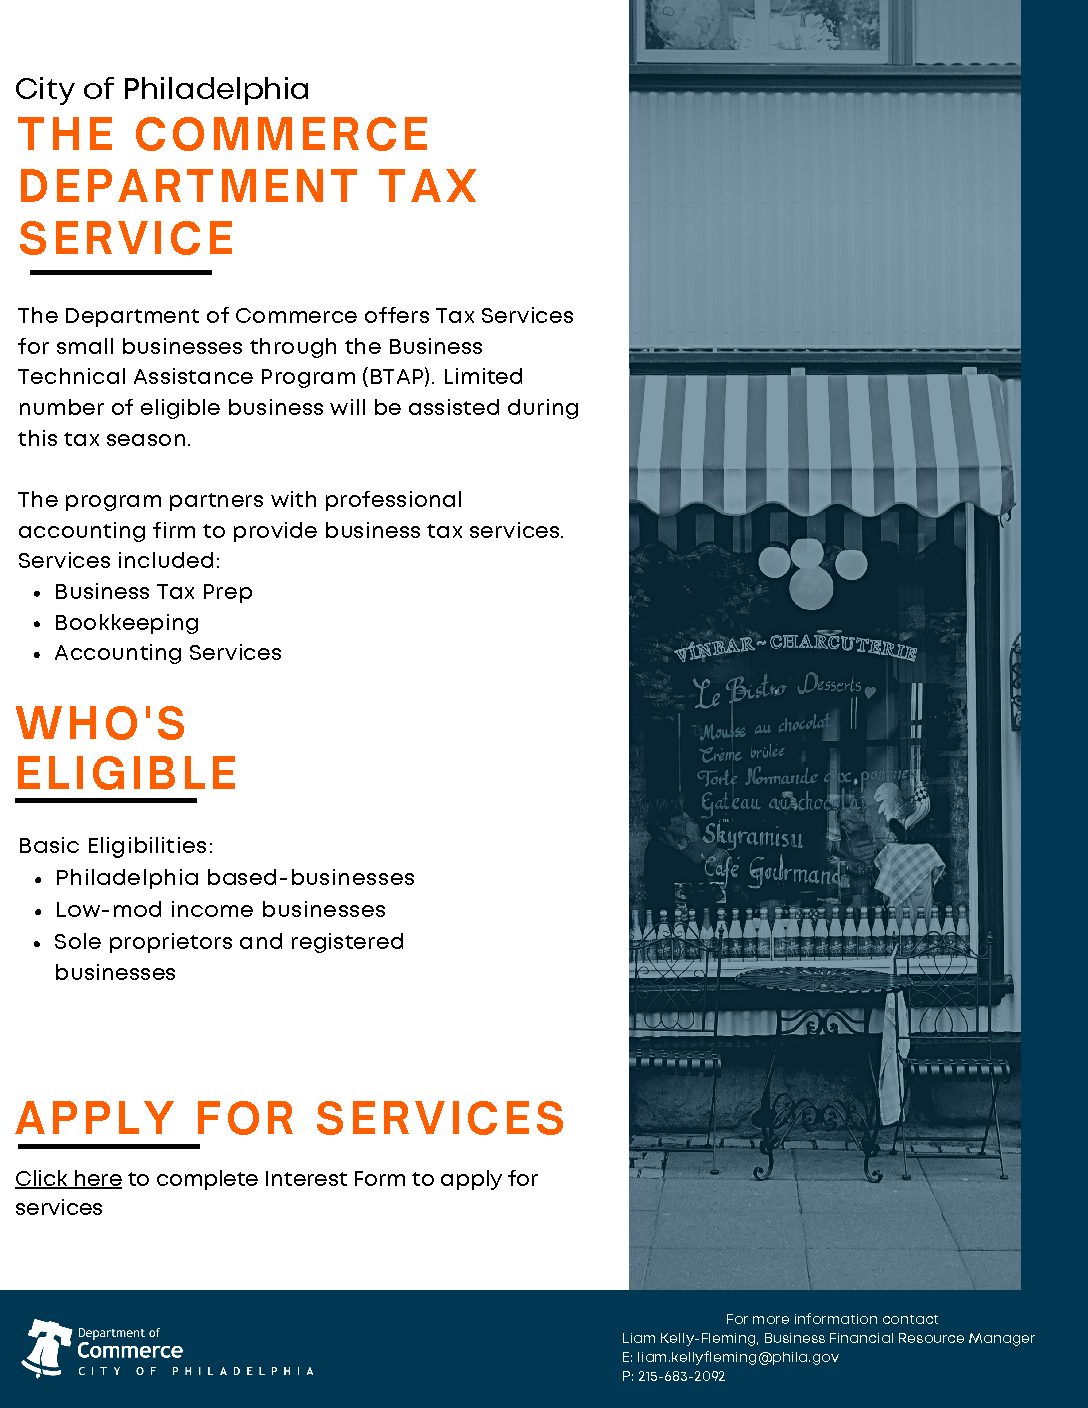 City of Philadelphia Introduces Commerce Department Tax Service